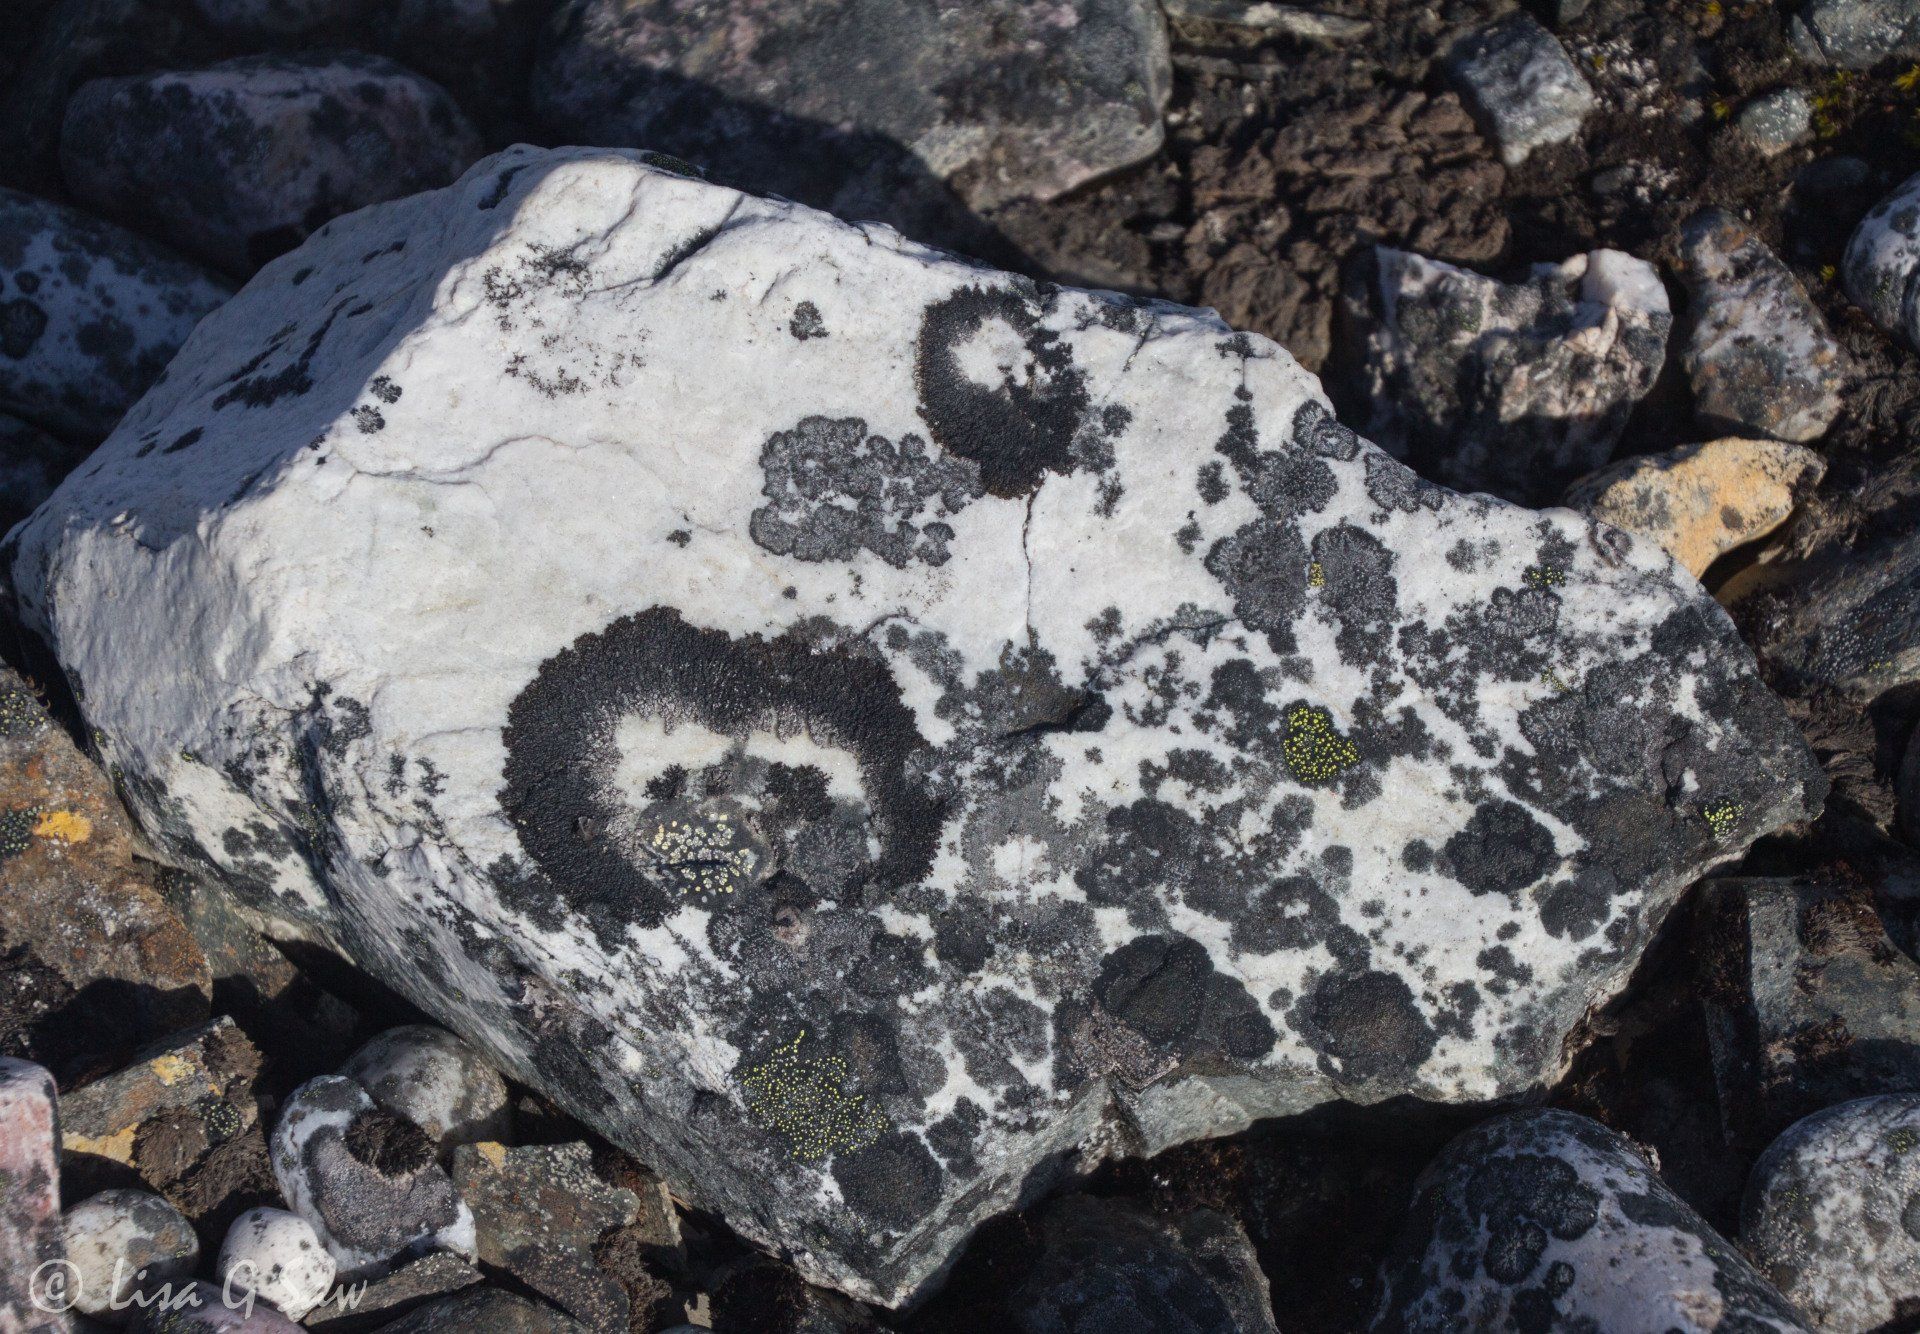 Lichen growing on rock on remote Arctic island